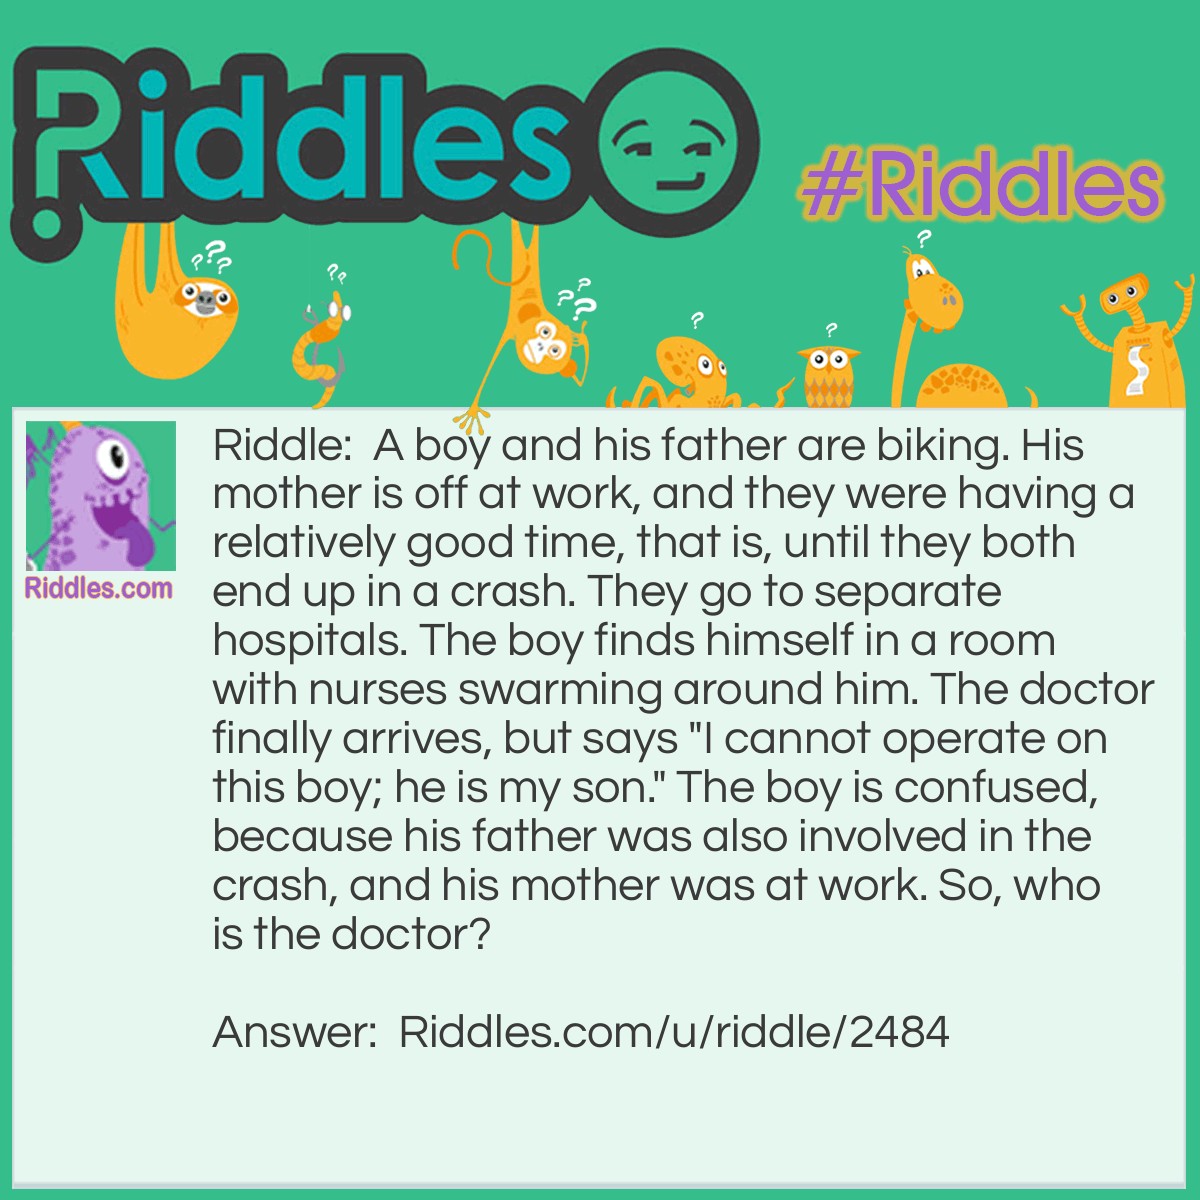 Riddle: A boy and his father are biking. His mother is off at work, and they were having a relatively good time, that is, until they both end up in a crash. They go to separate hospitals. The boy finds himself in a room with nurses swarming around him. The doctor finally arrives, but says "I cannot operate on this boy; he is my son." The boy is confused, because his father was also involved in the crash, and his mother was at work. So, who is the doctor? Answer: The doctor is his mother. His mother's job was a doctor.